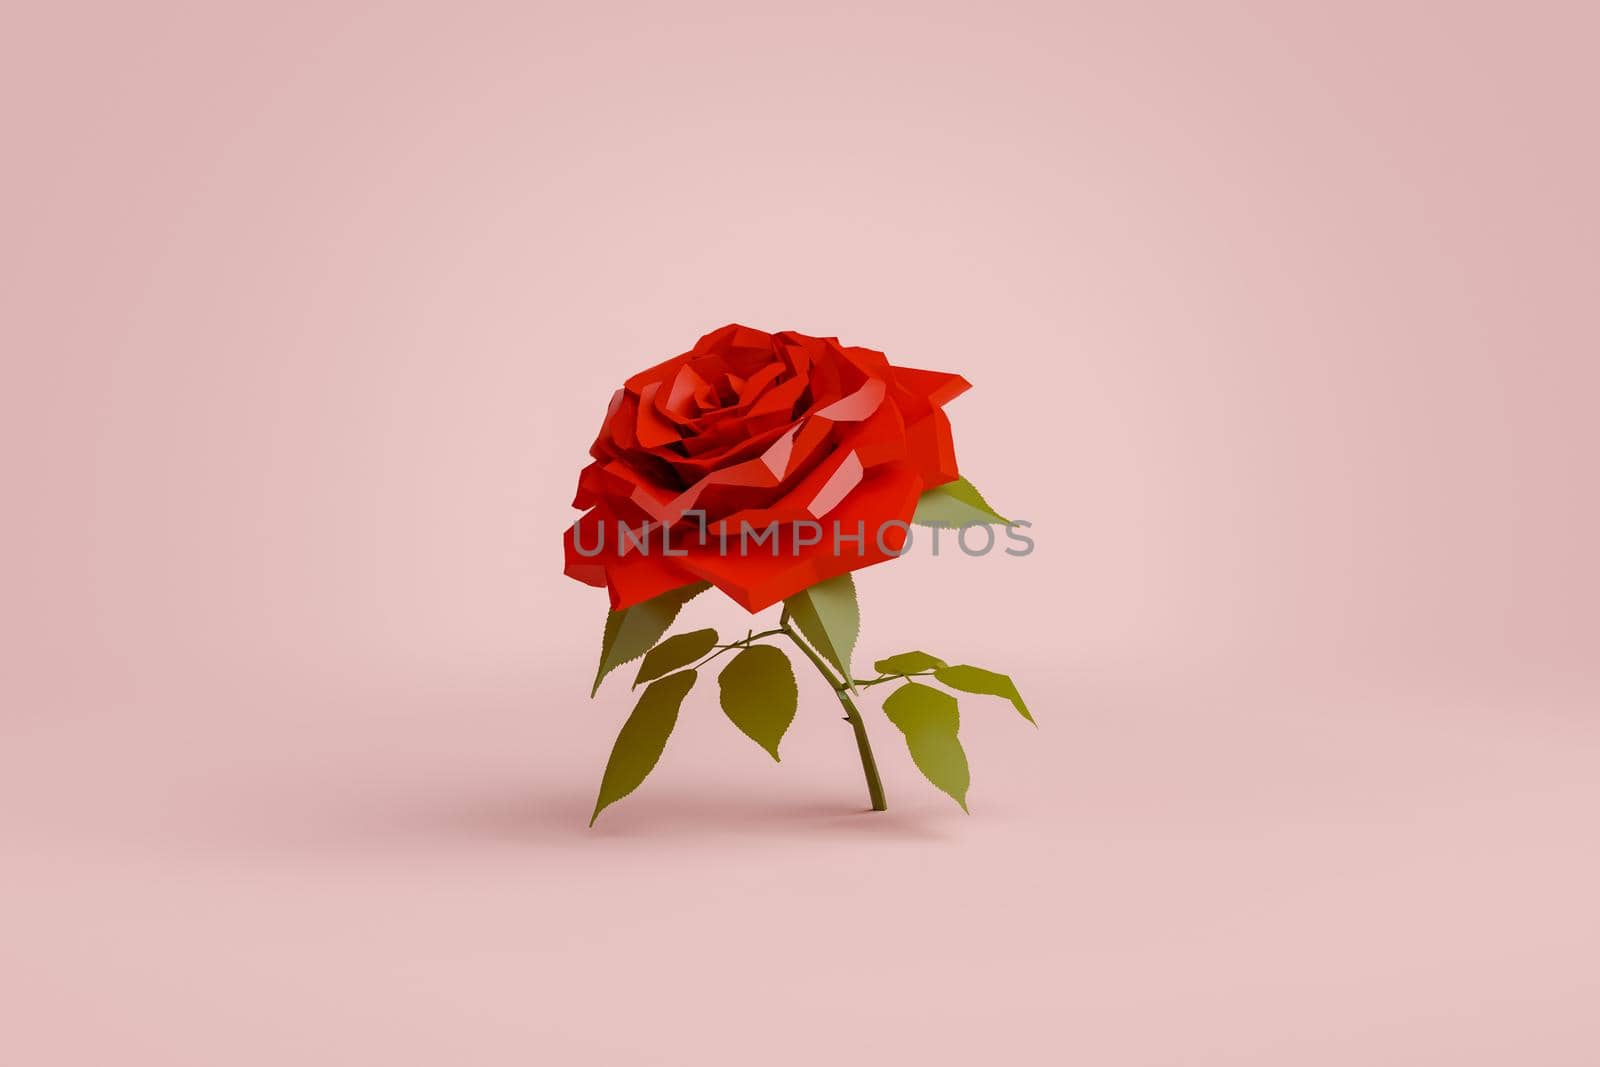 minimalist lowpoly rose on red background by asolano